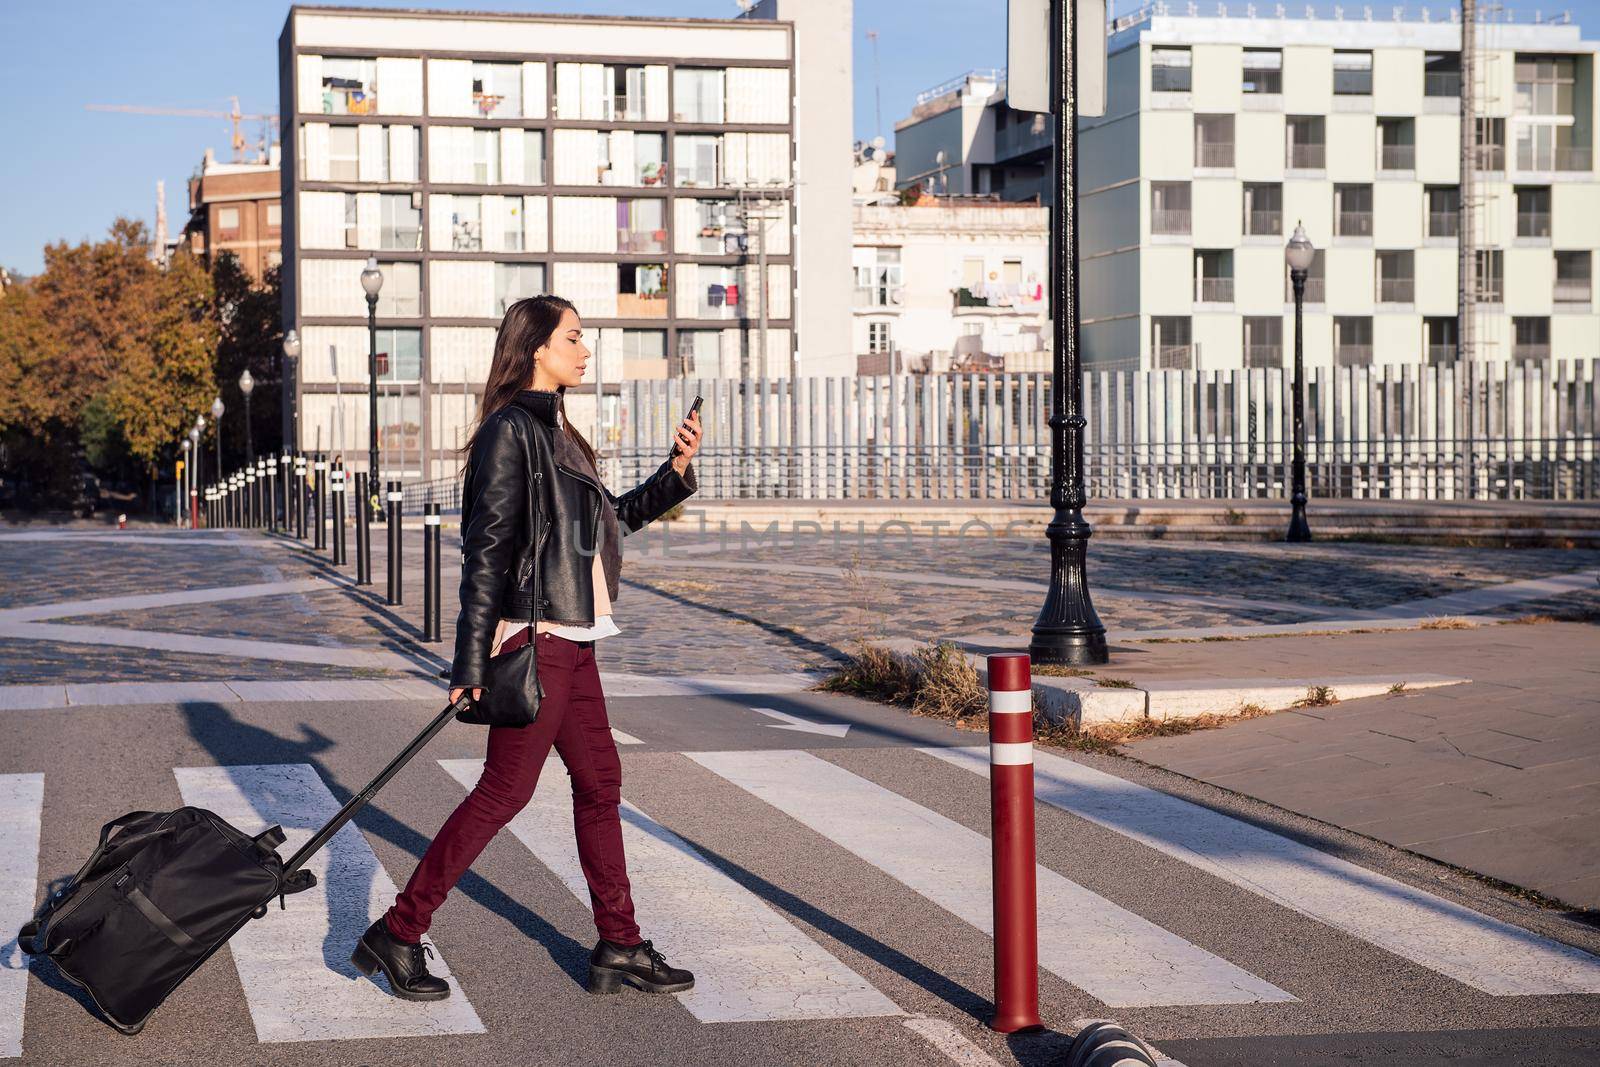 woman with trolley suitcase consulting phone while crossing the street at a pedestrian crosswalk, concept of travel and urban lifestyle